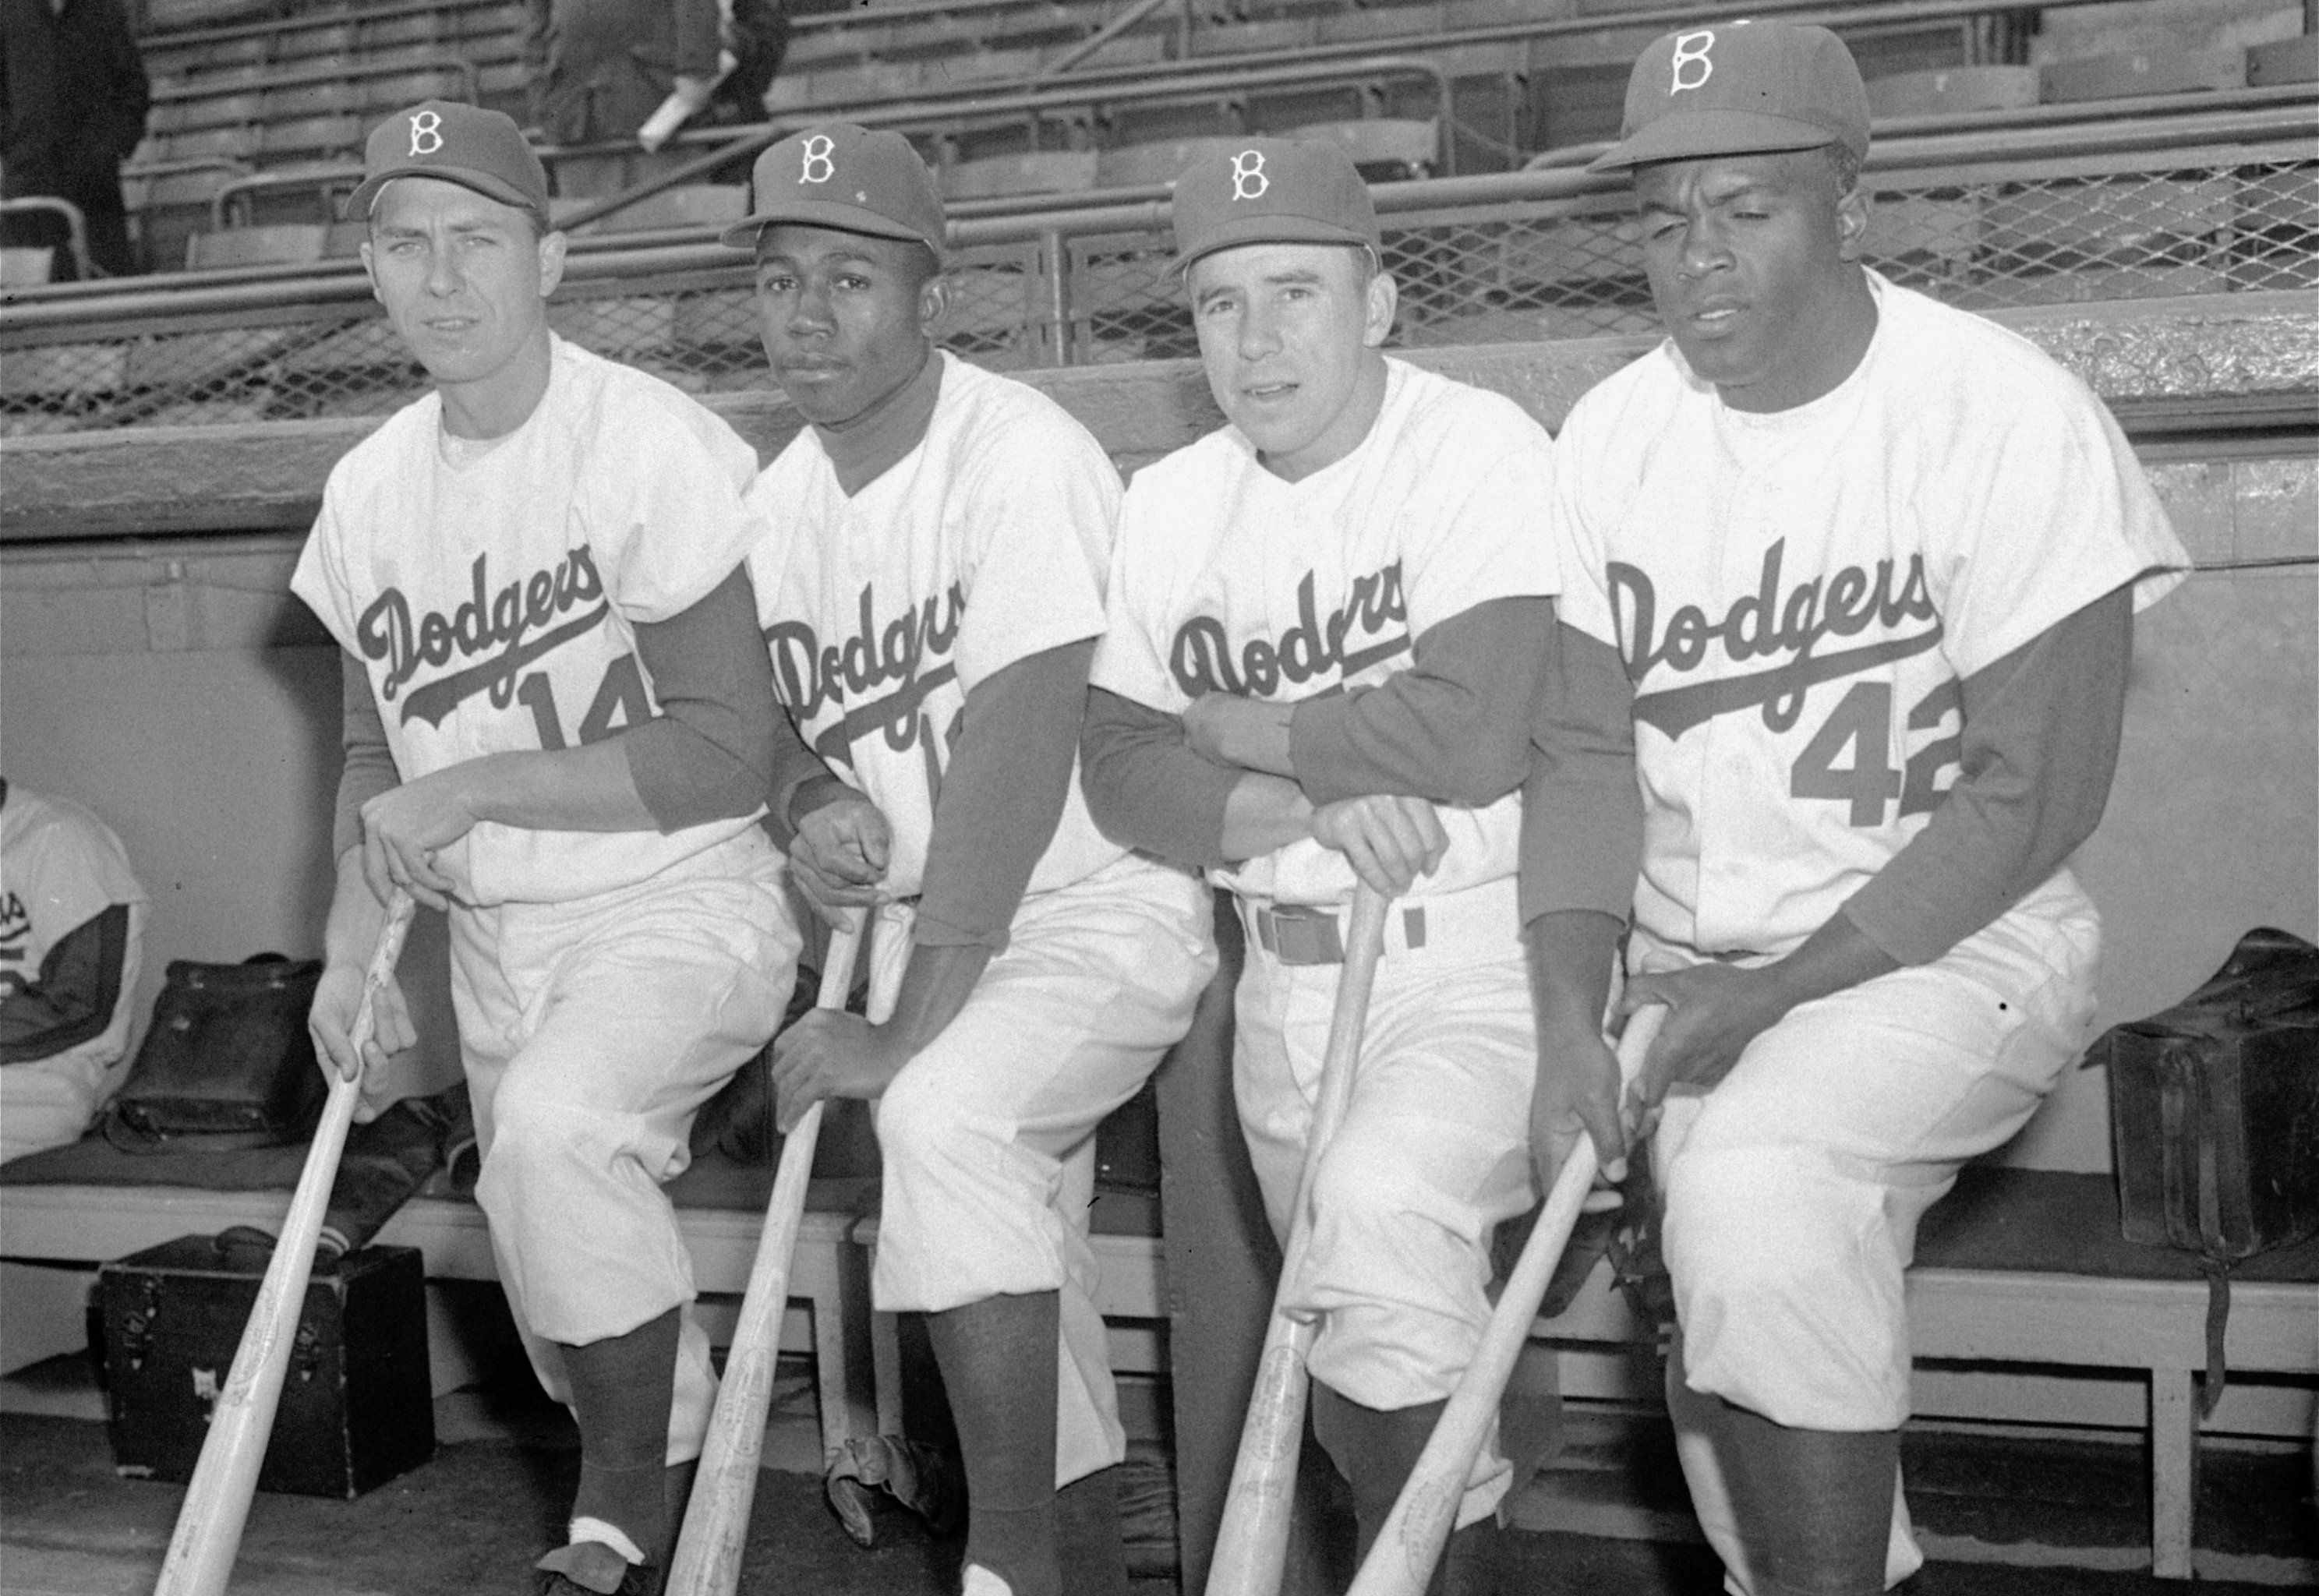 Dodgers legend Roy Campanella now youngest player in MLB history